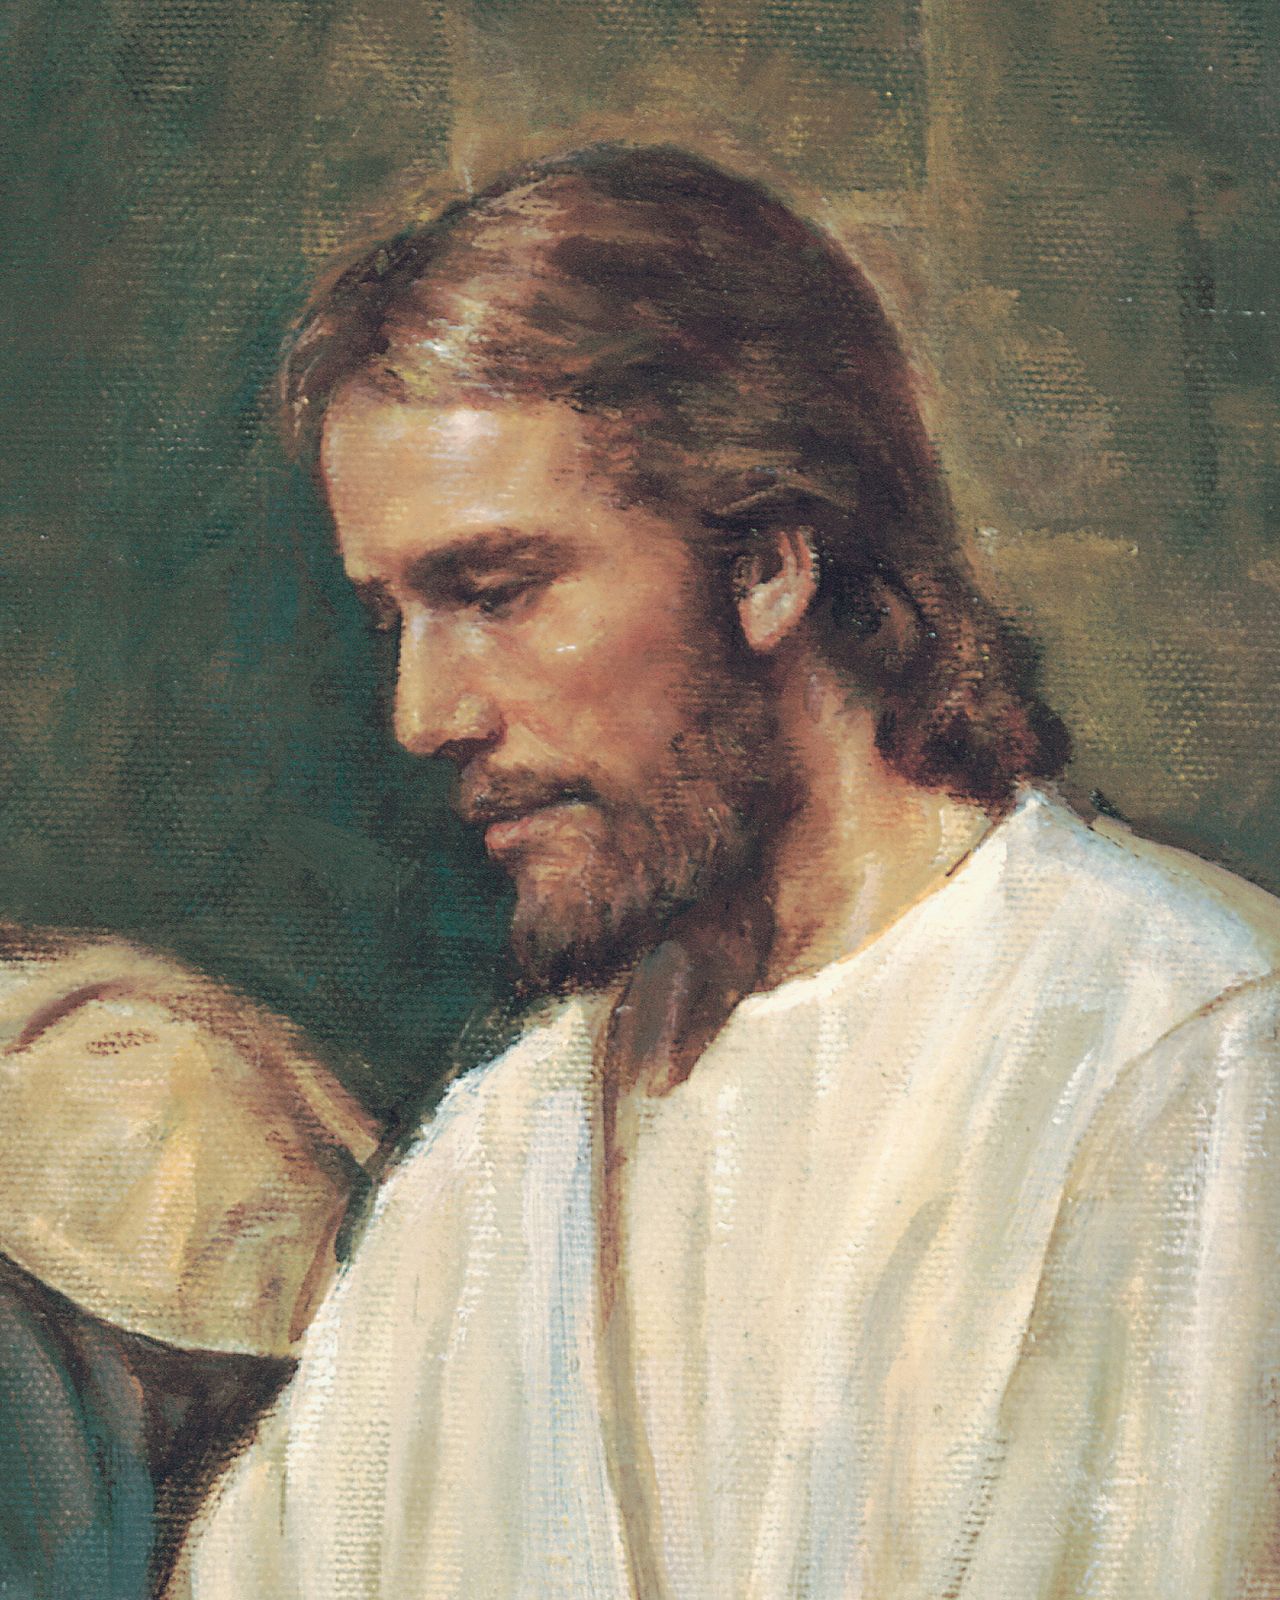 Detail of the Savior’s face from the painting Christ Healing a Blind Man, by Del Parson